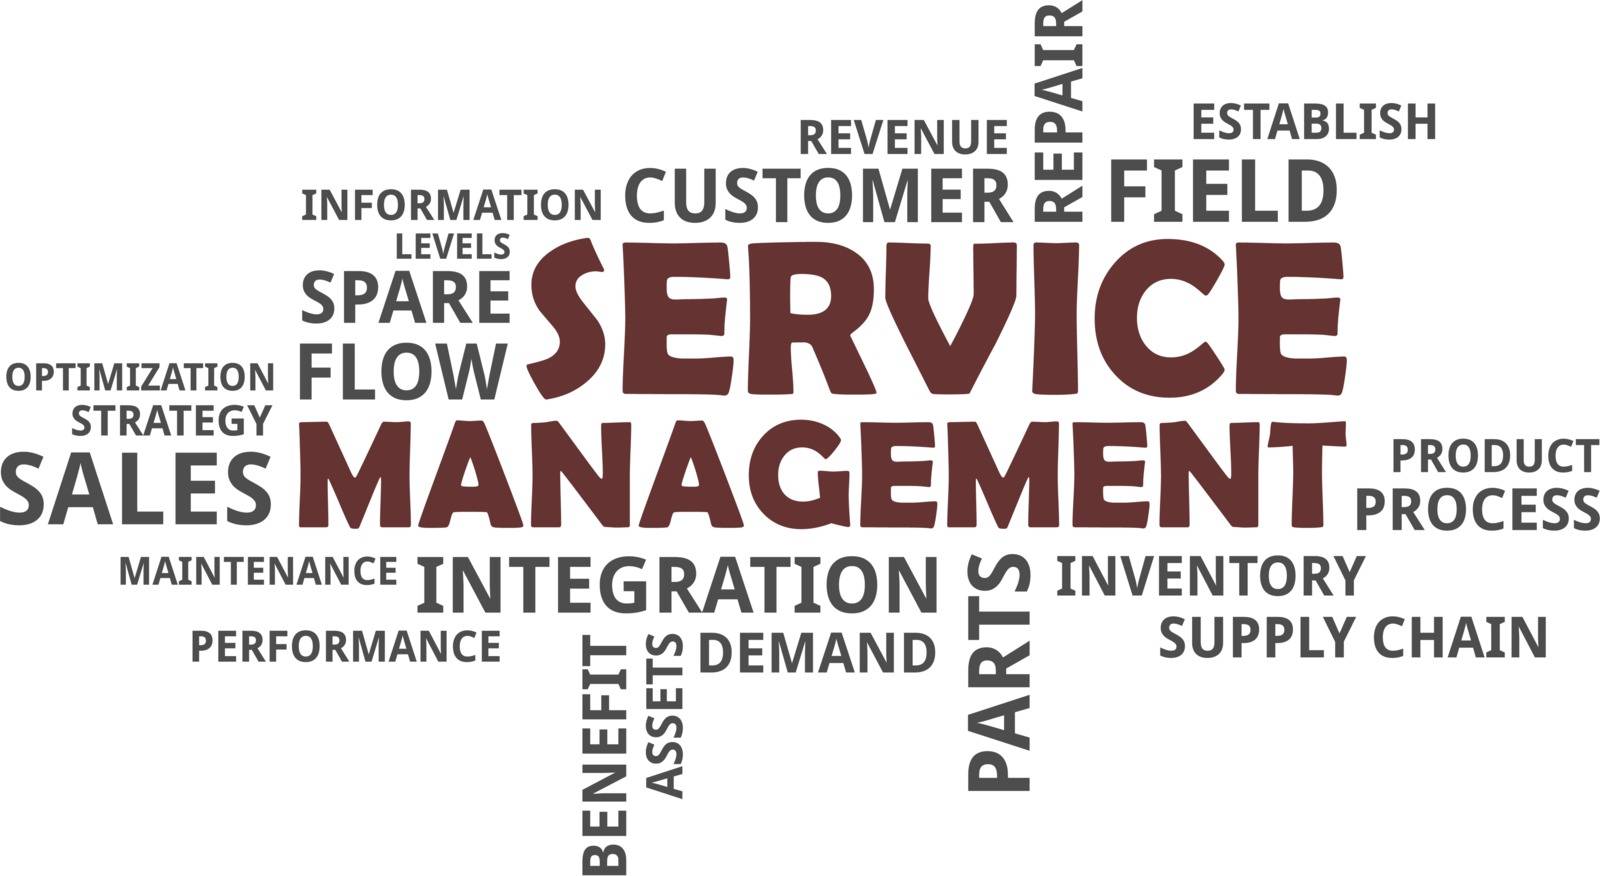 A word cloud of service management related items